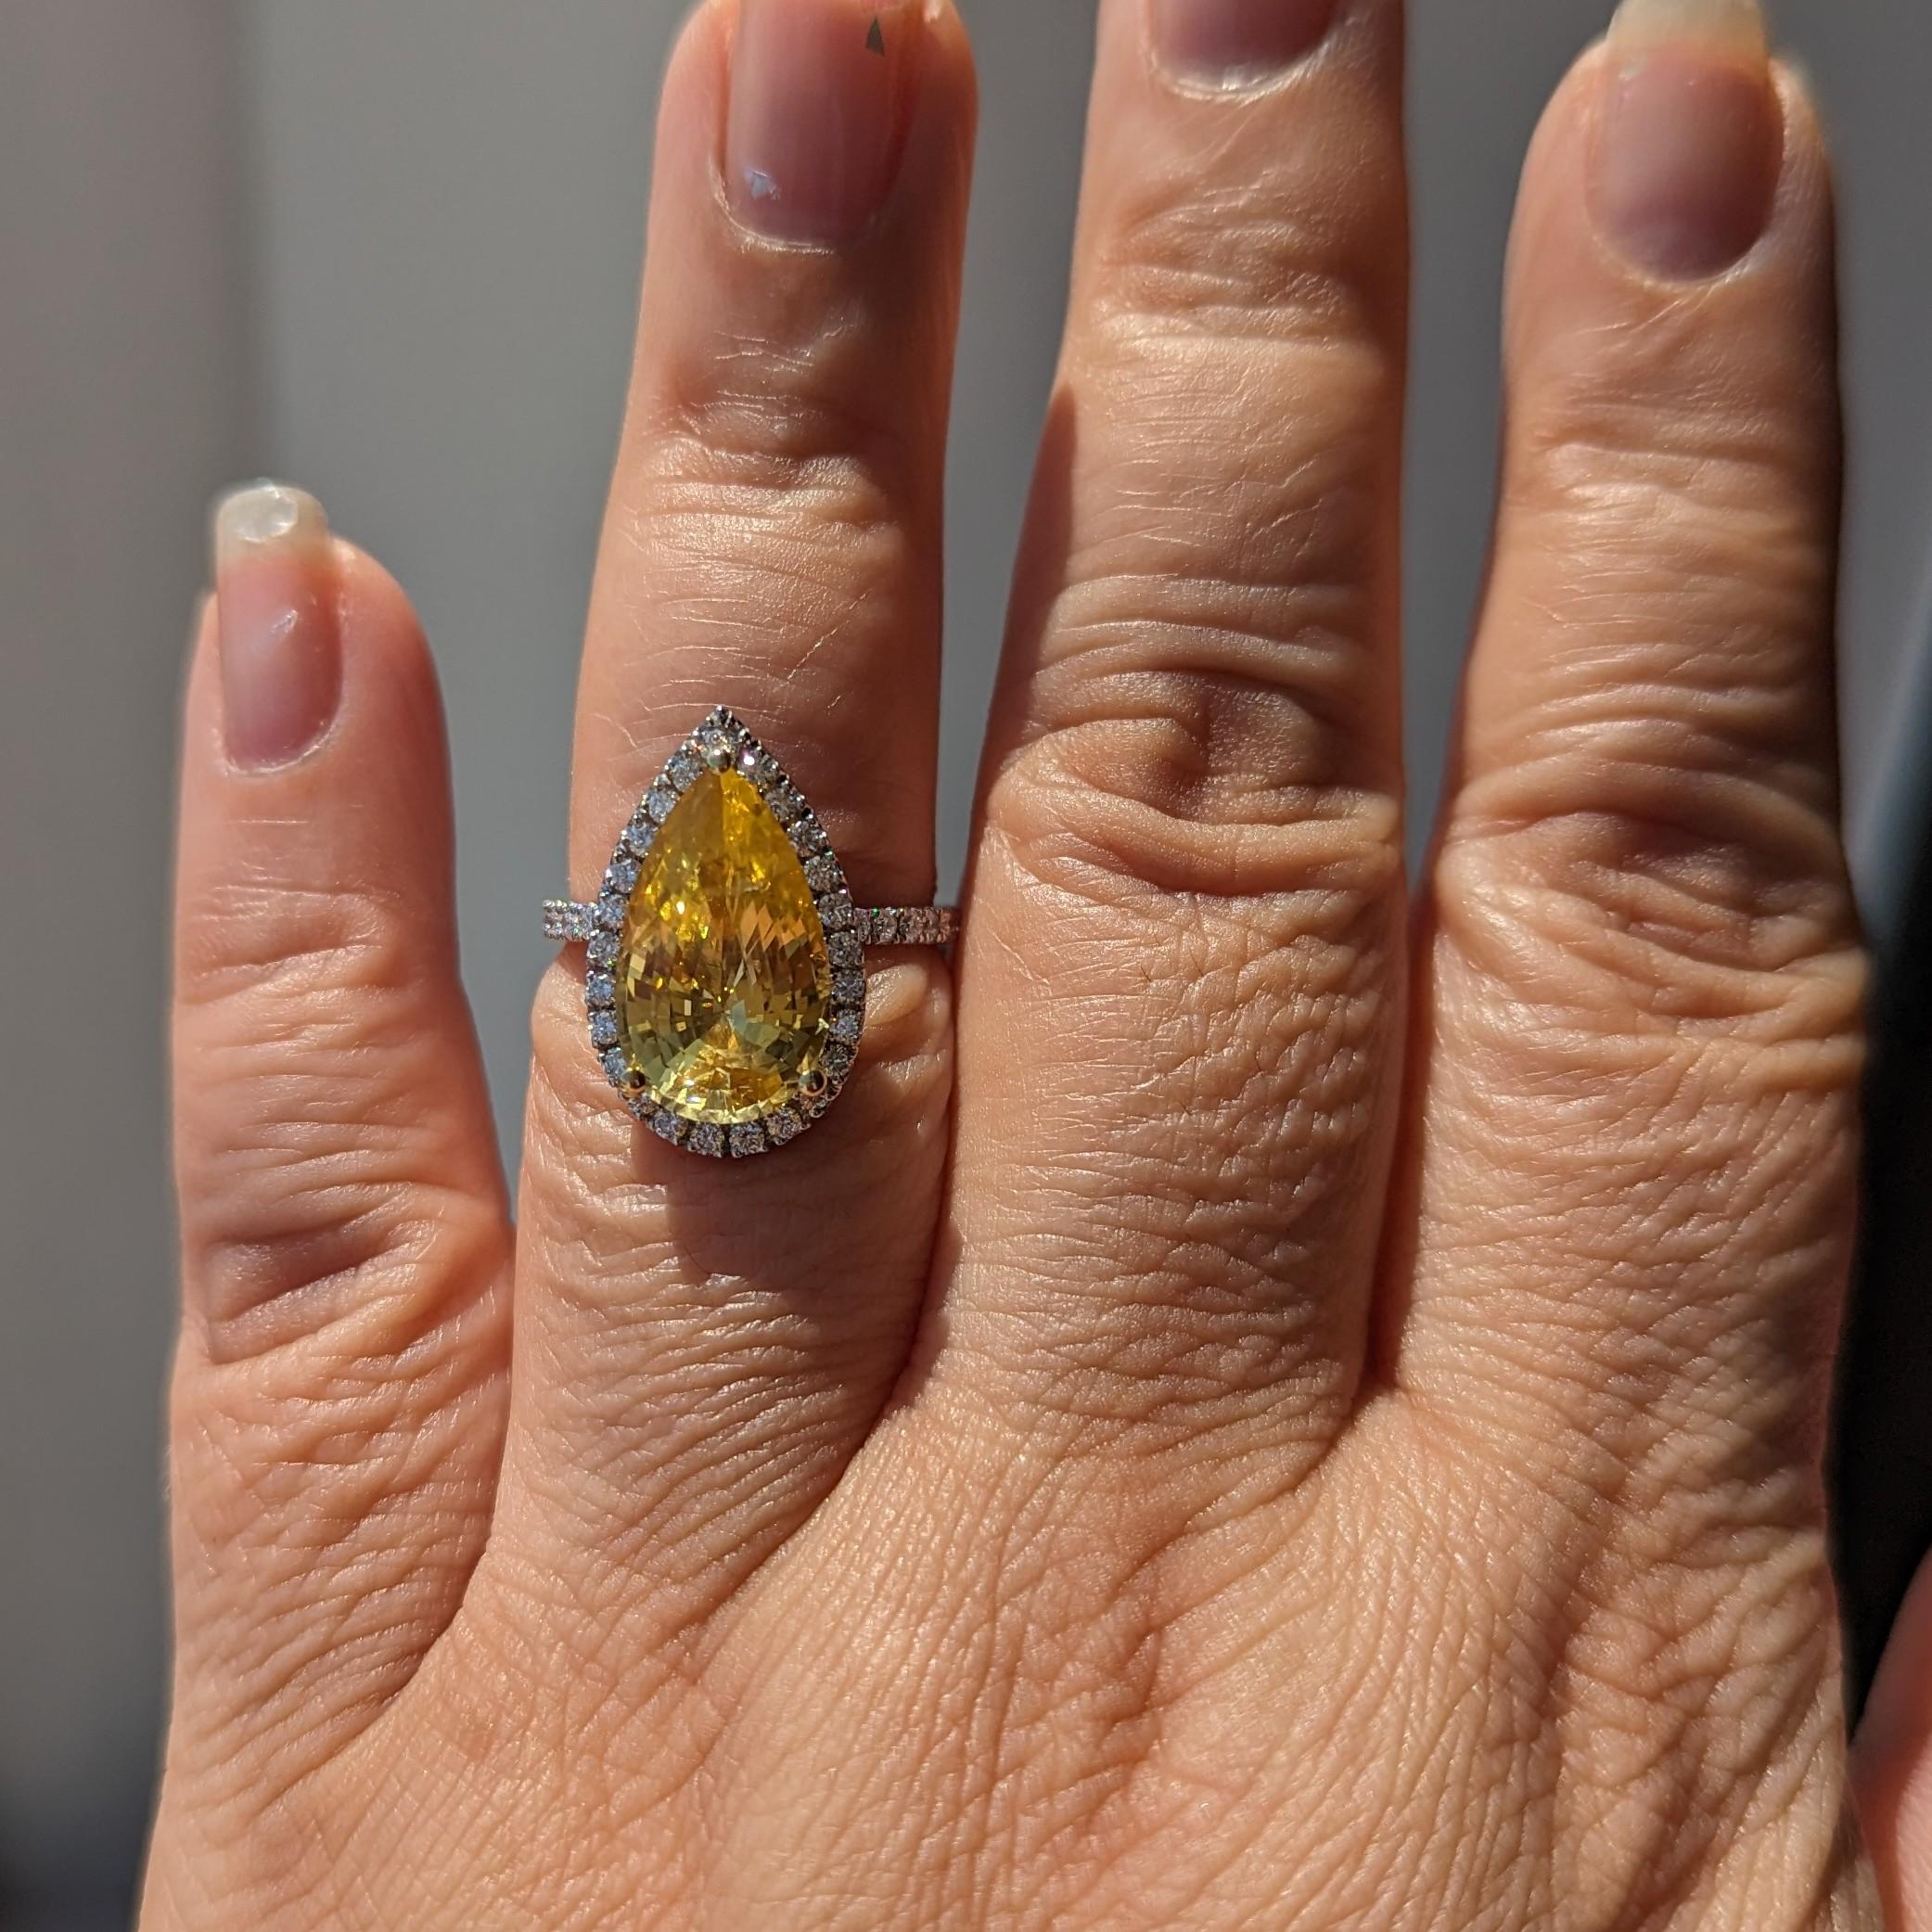 Gorgeous unheated 6.20 ct. orangy yellow pear shape sapphire with 0.72 ct. good quality white diamond rounds.  Handmade in 18k yellow gold and platinum.  Ring size 6.75+.  GIA certificate included.